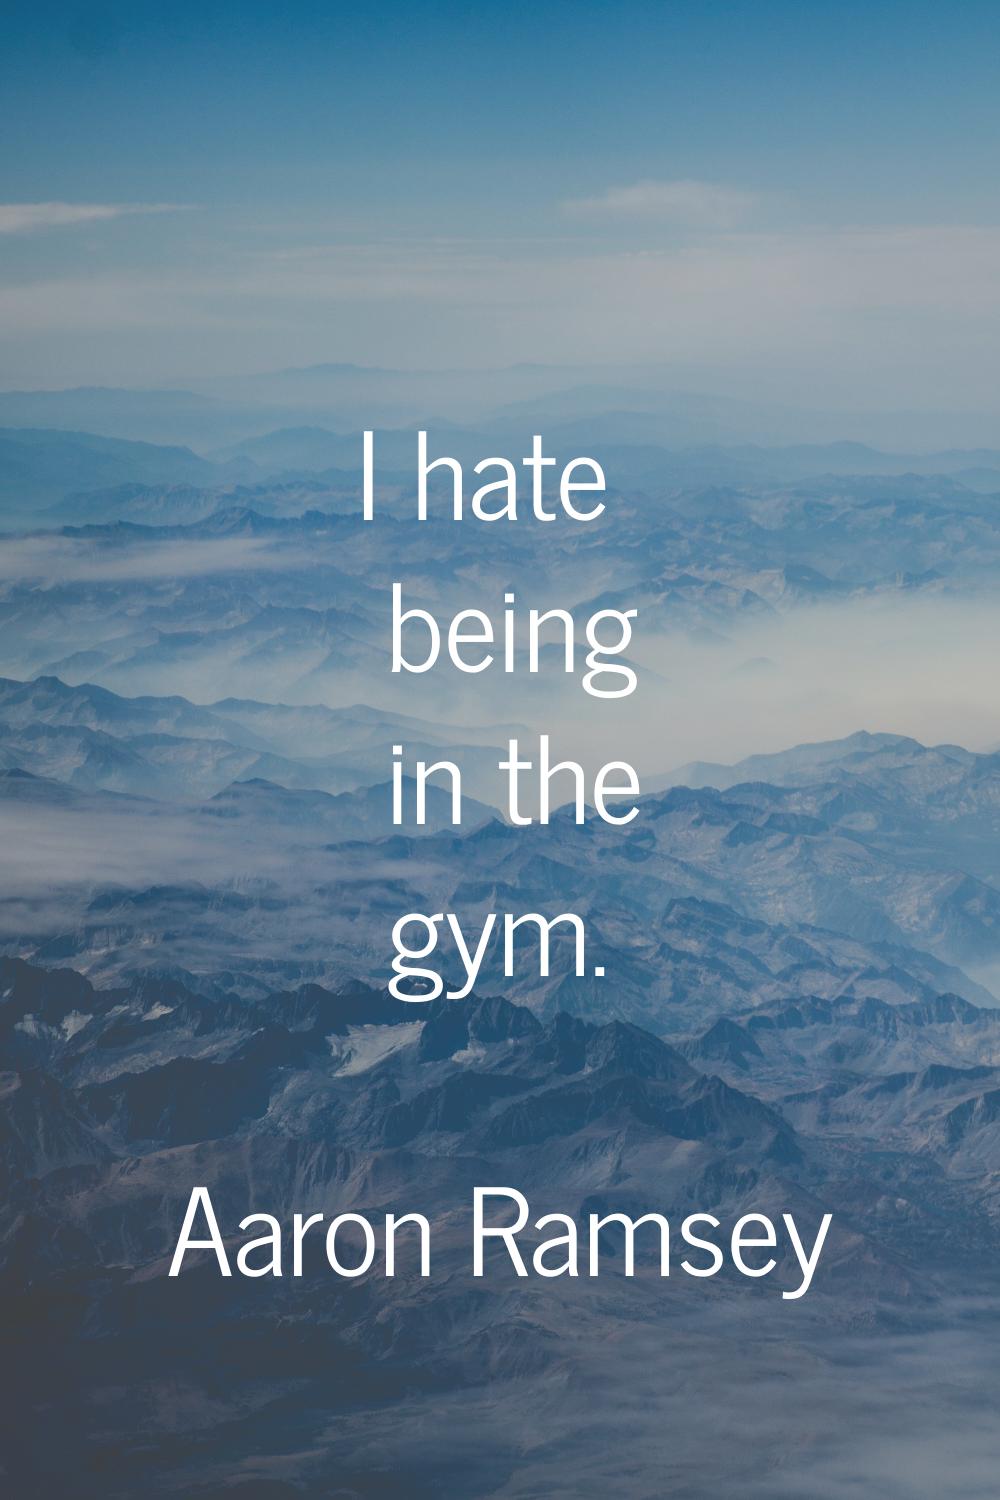 I hate being in the gym.